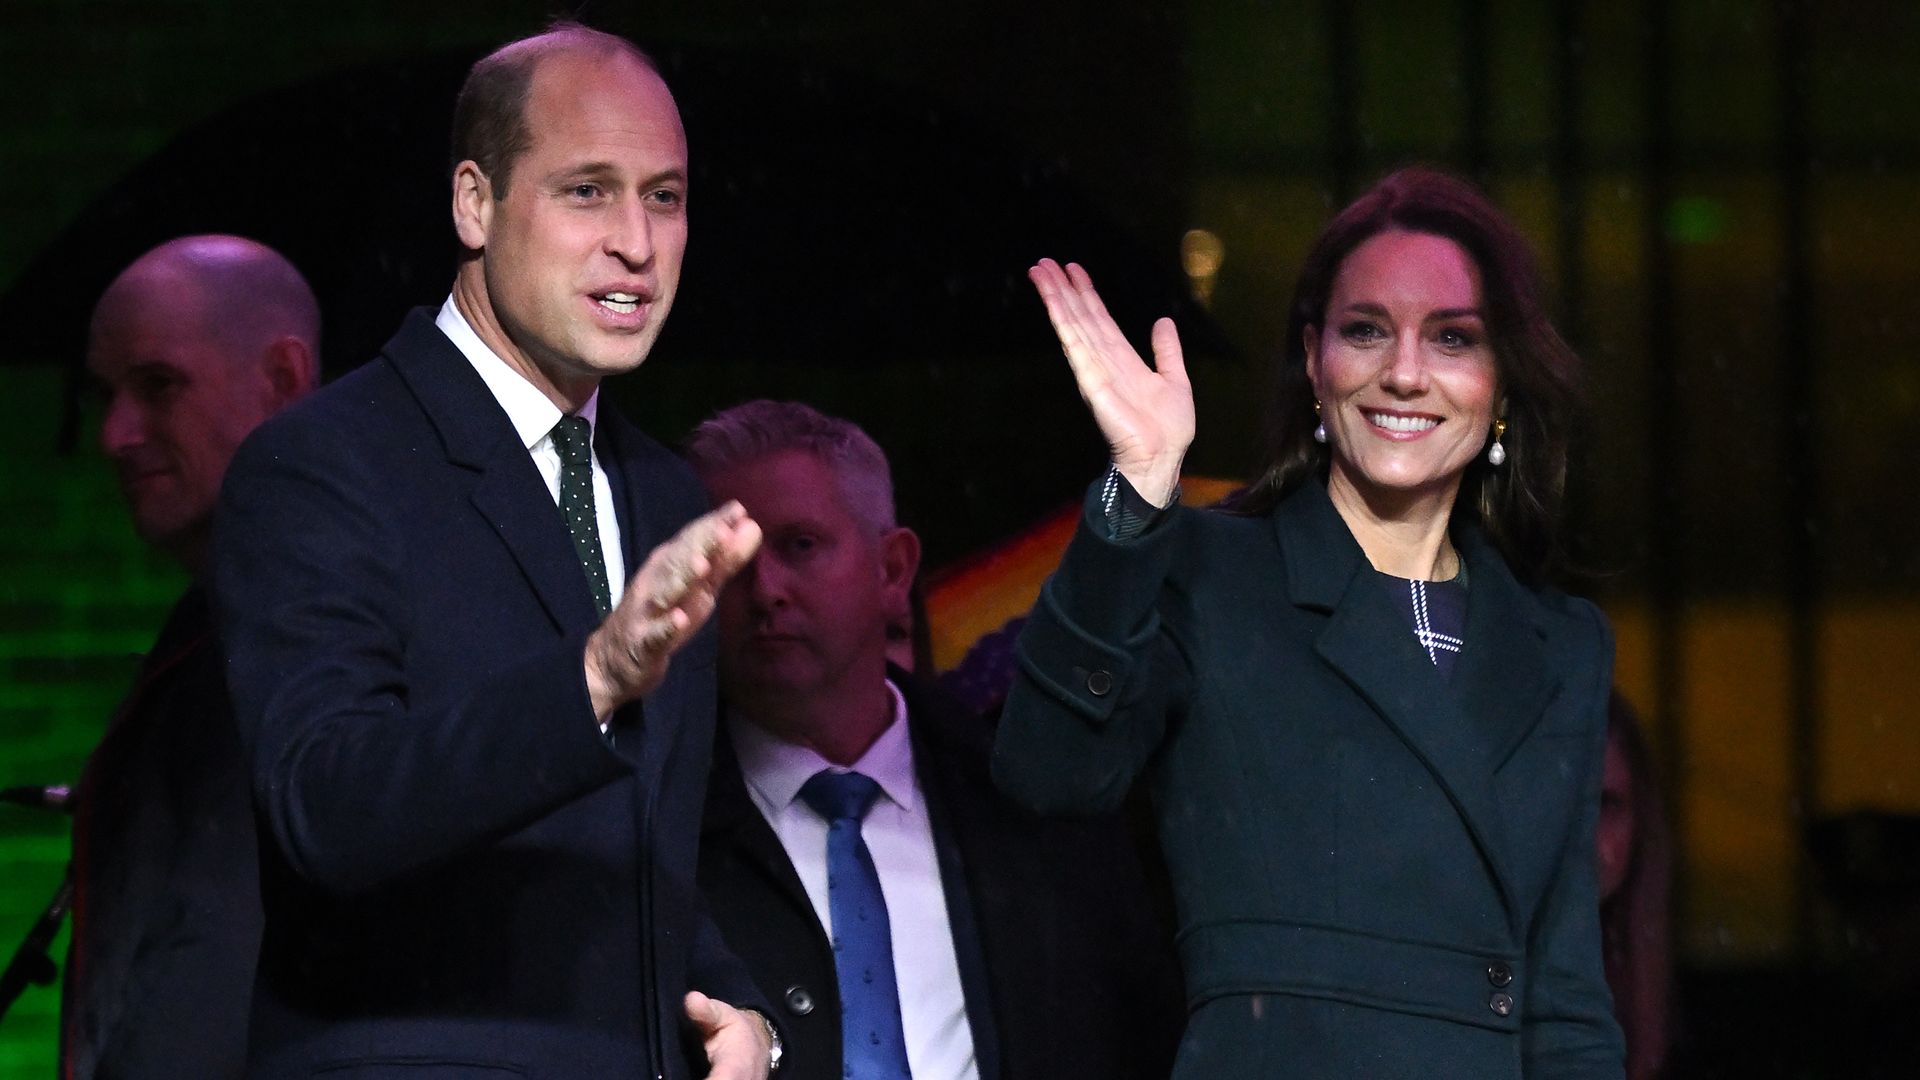 Prince William, left, and Princess Kate, right, wave as they stand by a podium with a green button. They pressed it and turned City Hall's lights green.